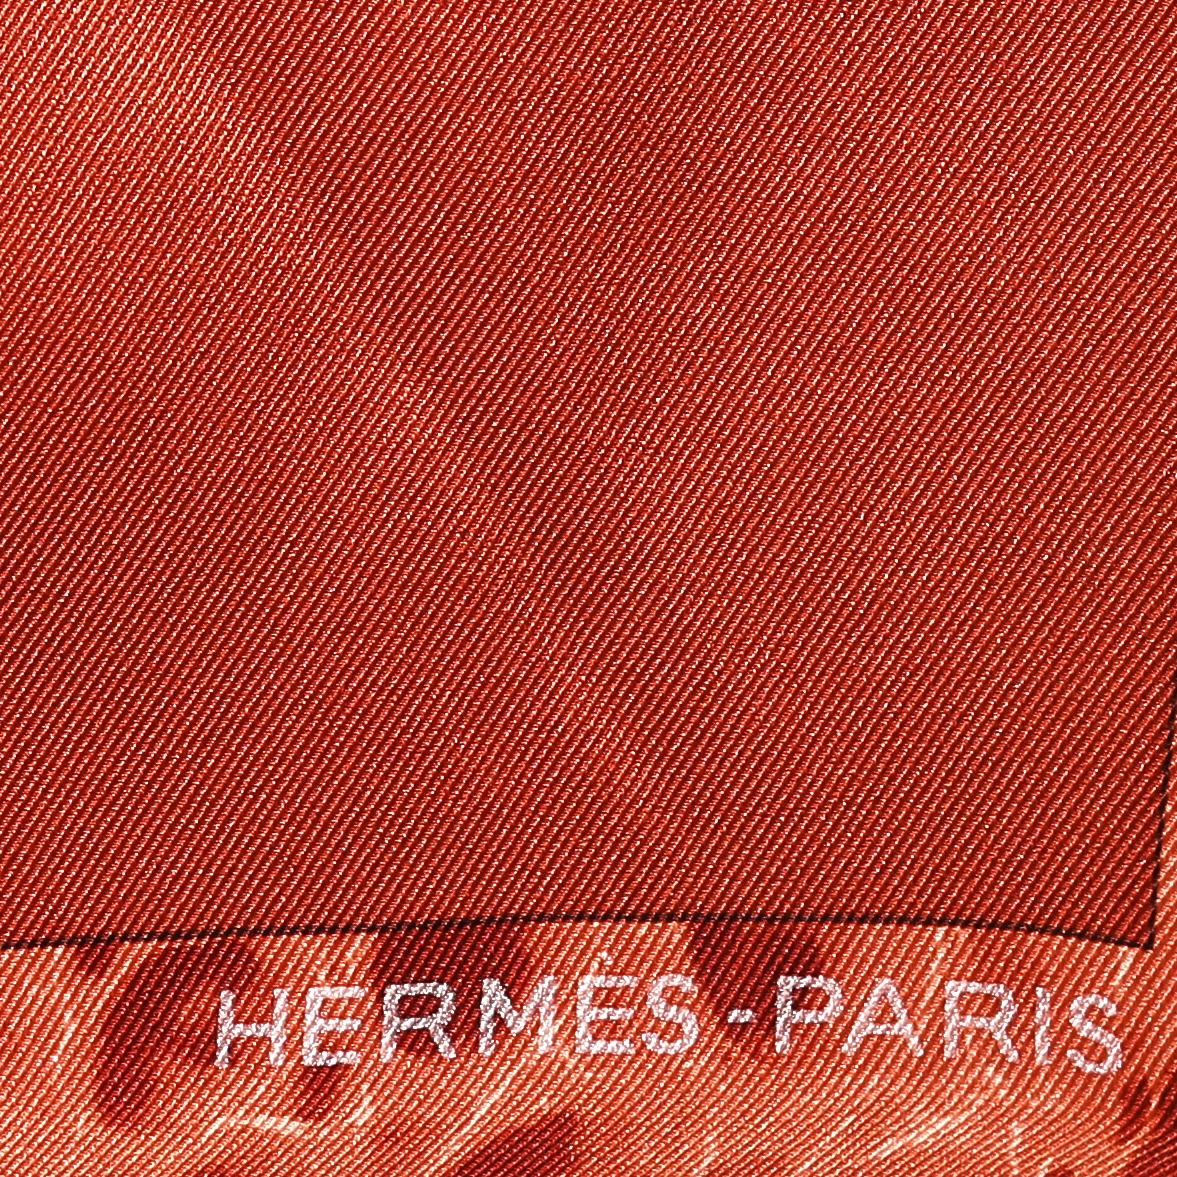 Hermes Orange Chaines & Gourmettes Printed Silk Square Scarf 2